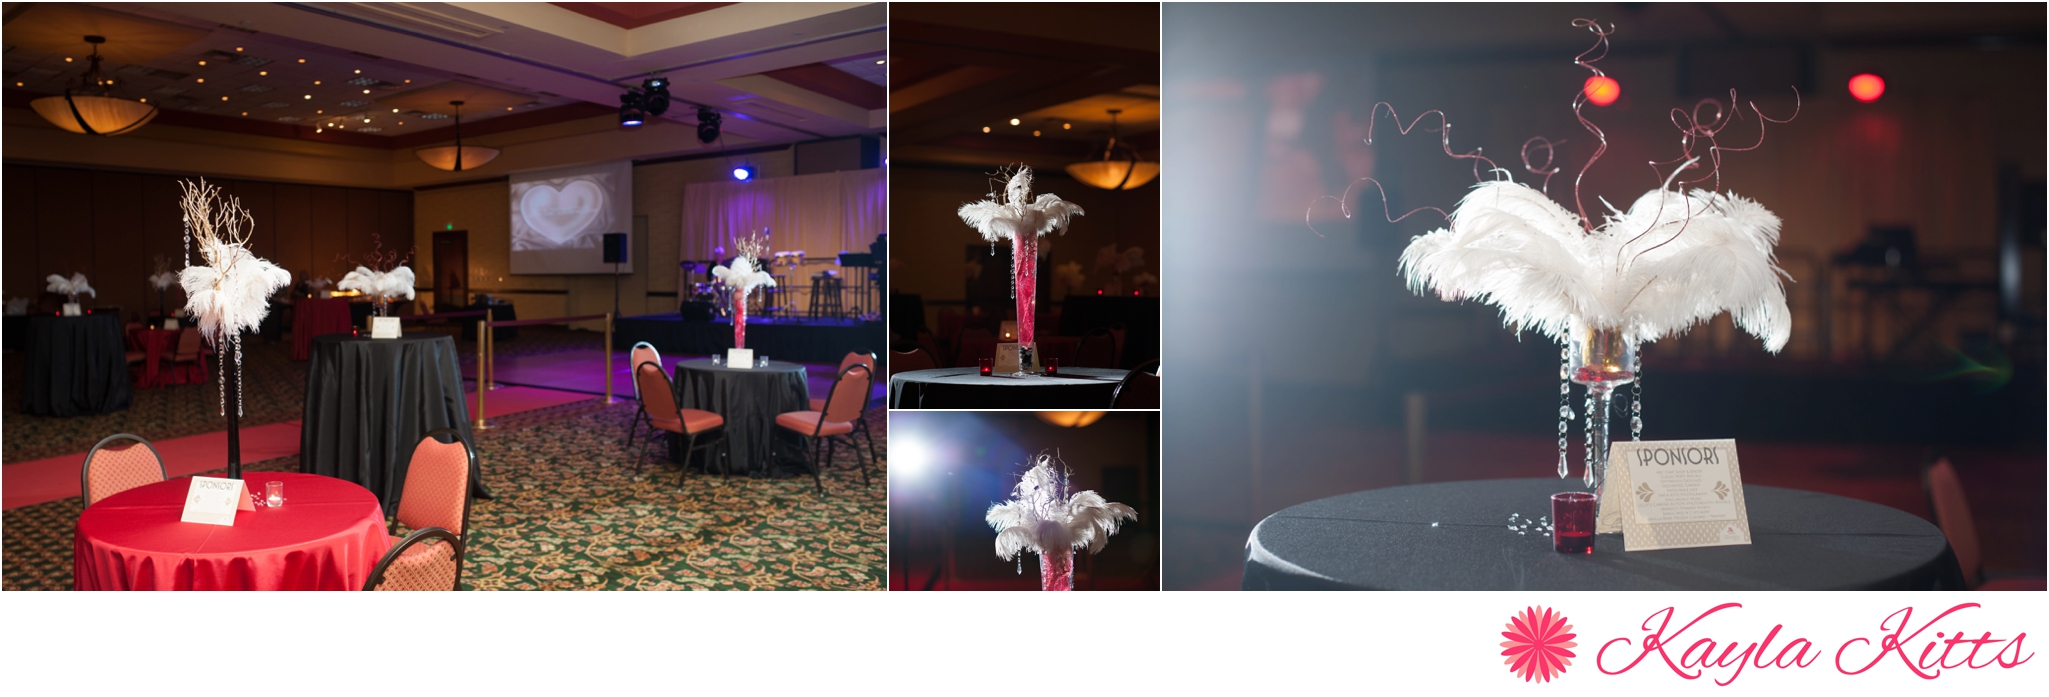 kayla kitts photography - perfect wedding guide - client appreciation party - albuqueruqe marriott_0002.jpg